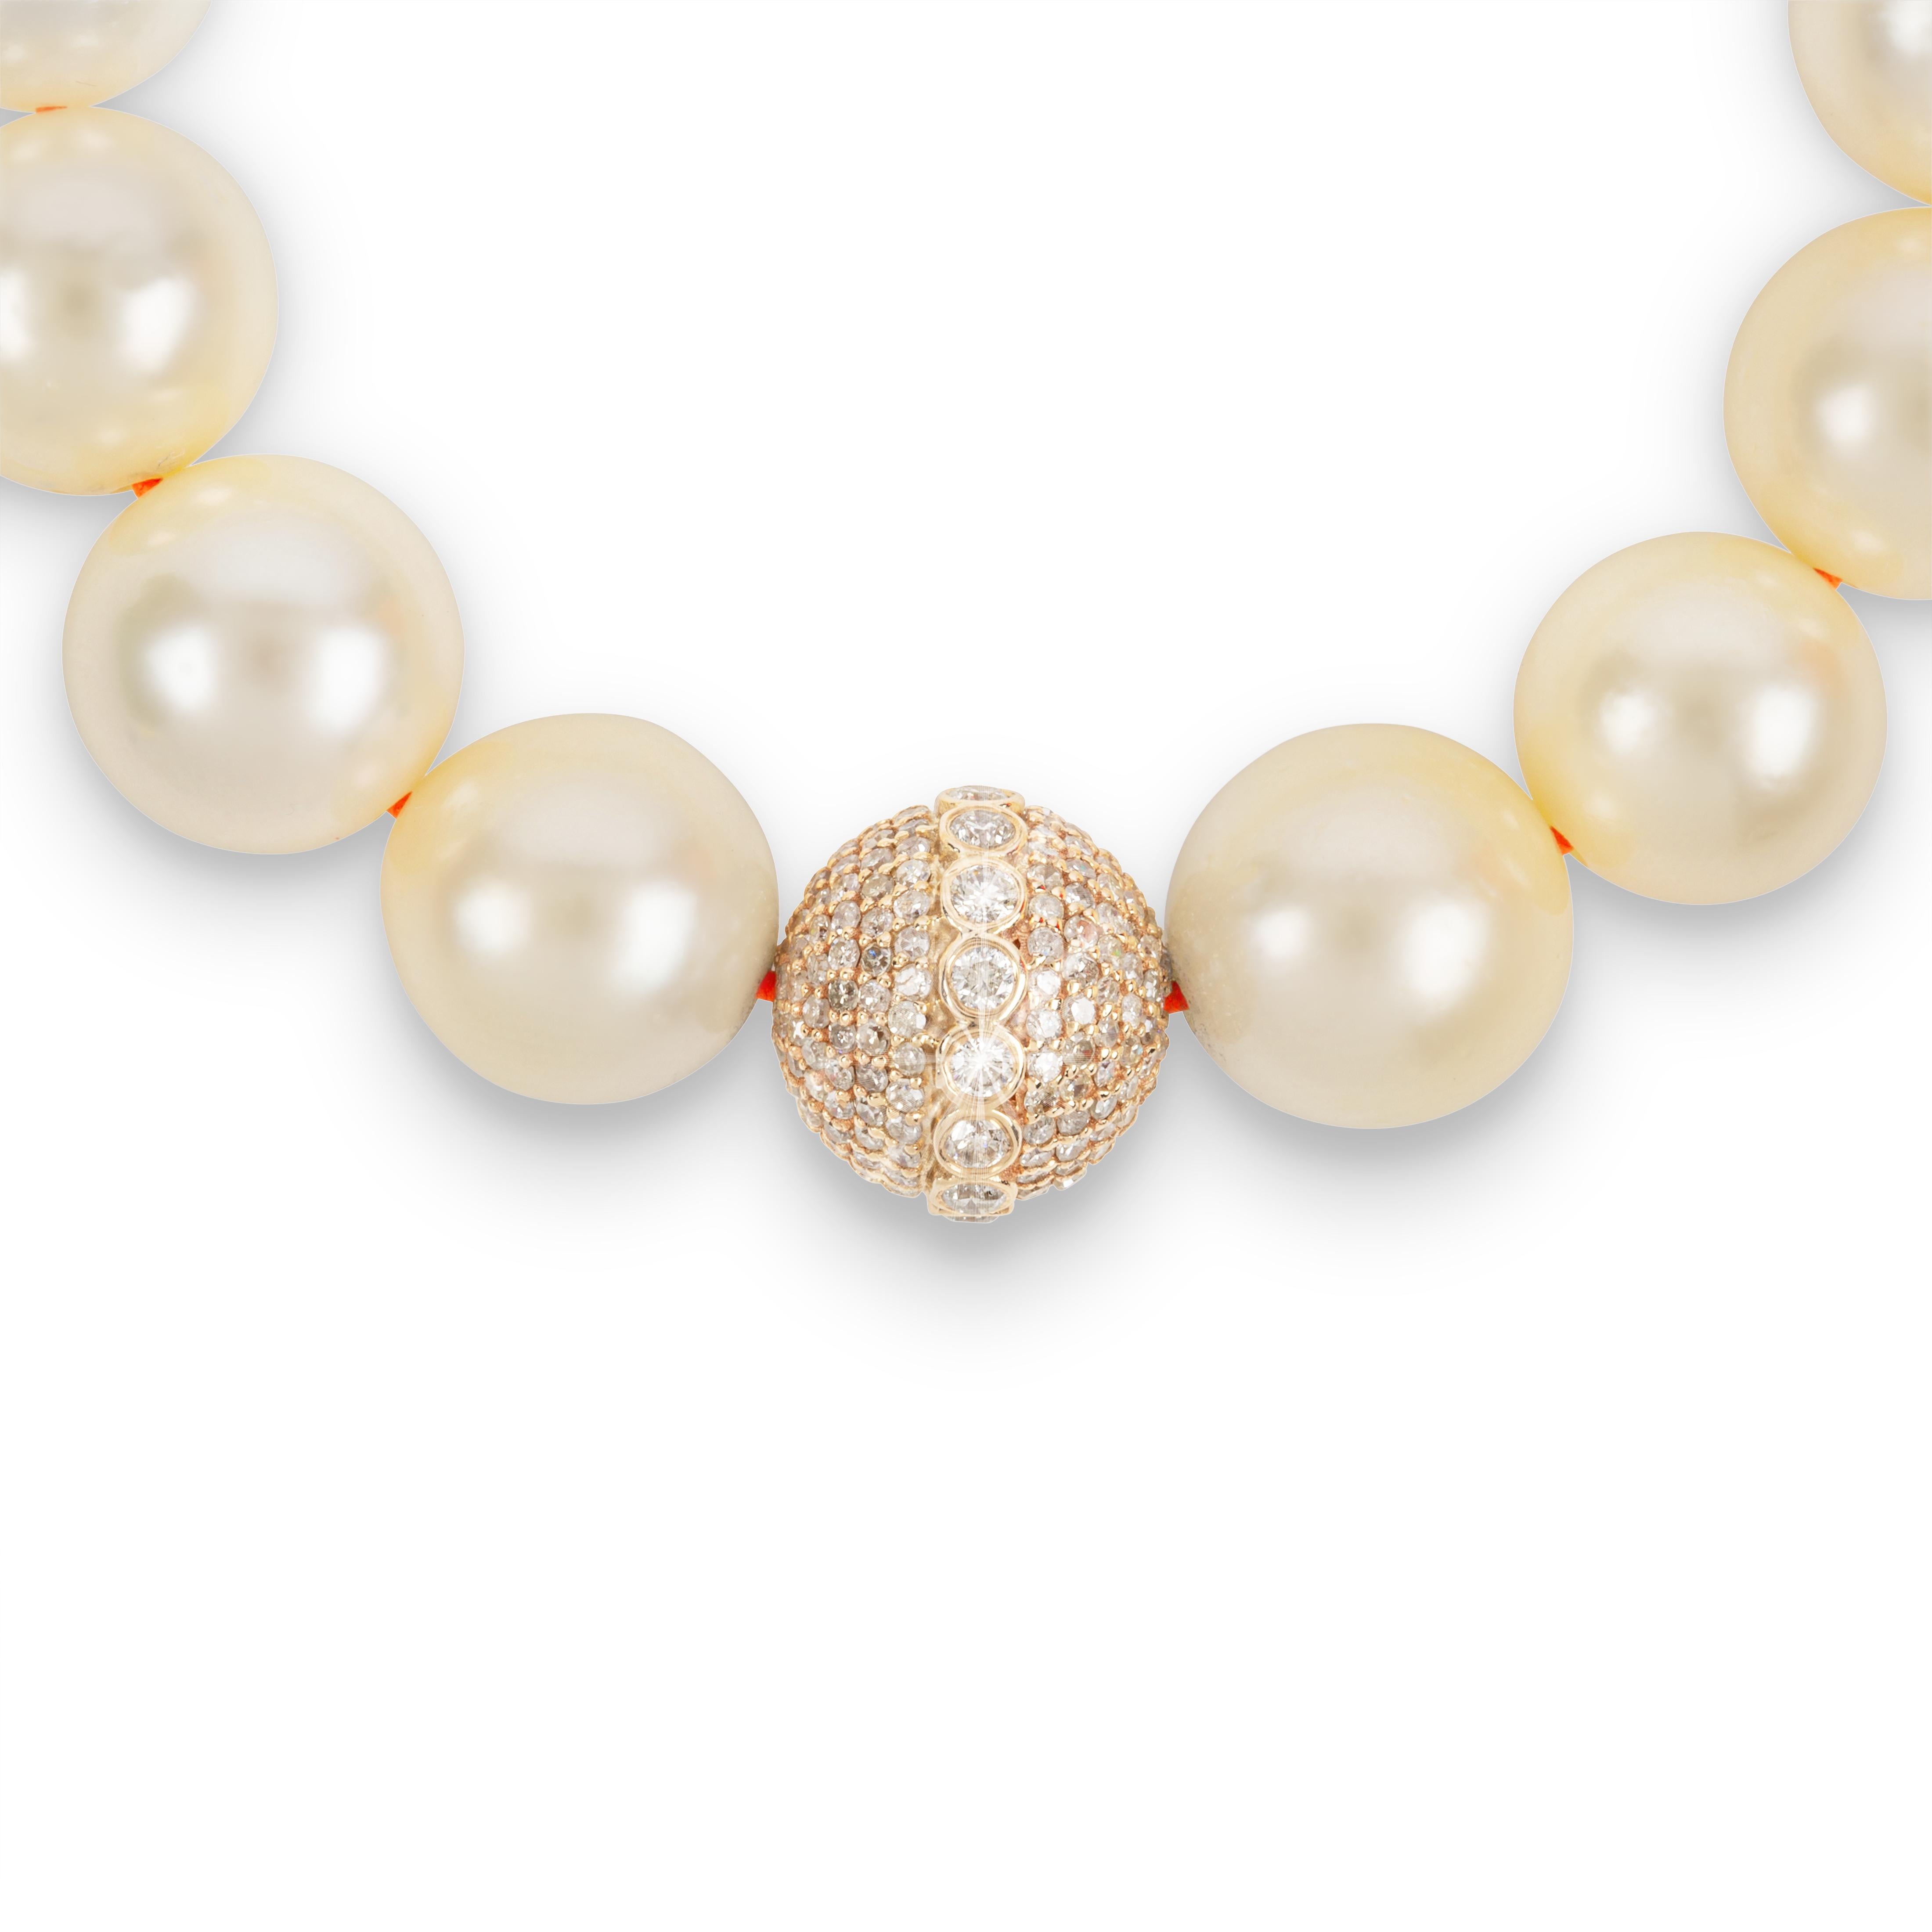 THEVAULT15's jewelry is defined by the classic beauty of pearls and diamonds, making them the perfect accessory for any occasion. The Ray bracelet is from precious AAA Golden South Sea pearls with 18k YG diamond beads that enhance each other